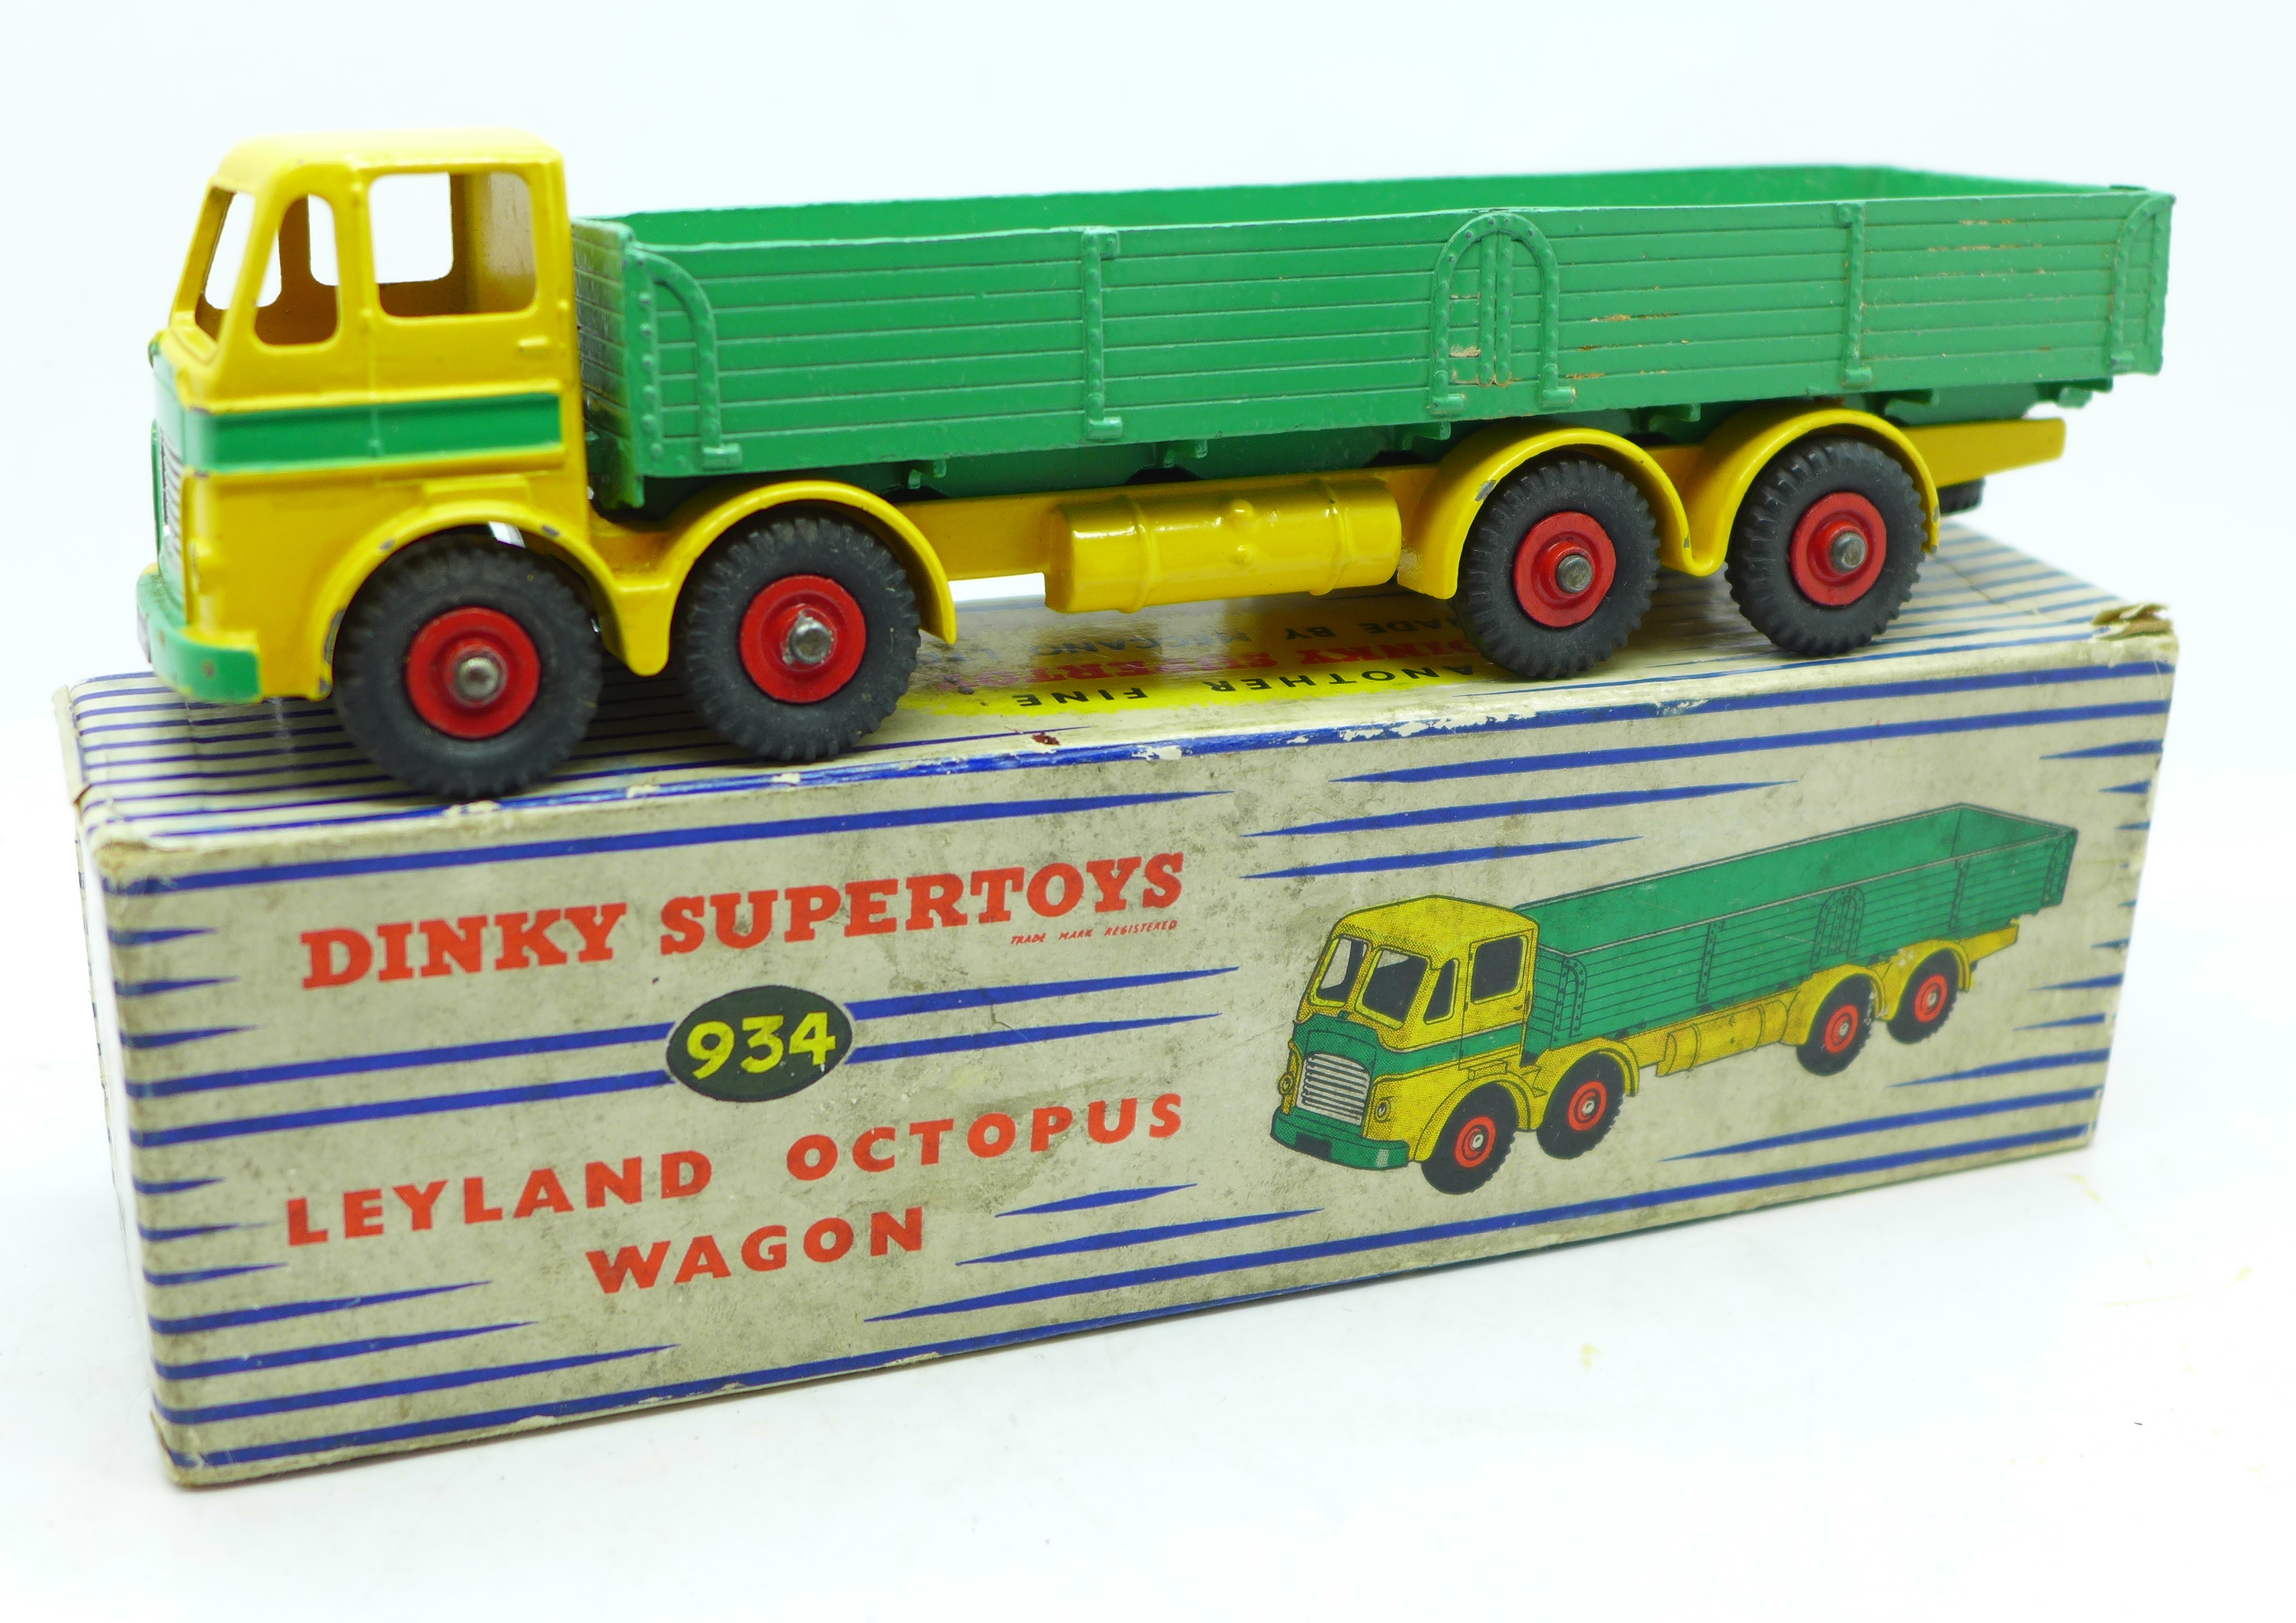 A Dinky Supertoys Leyland Octopus Wagon, 934, boxed - Image 3 of 9